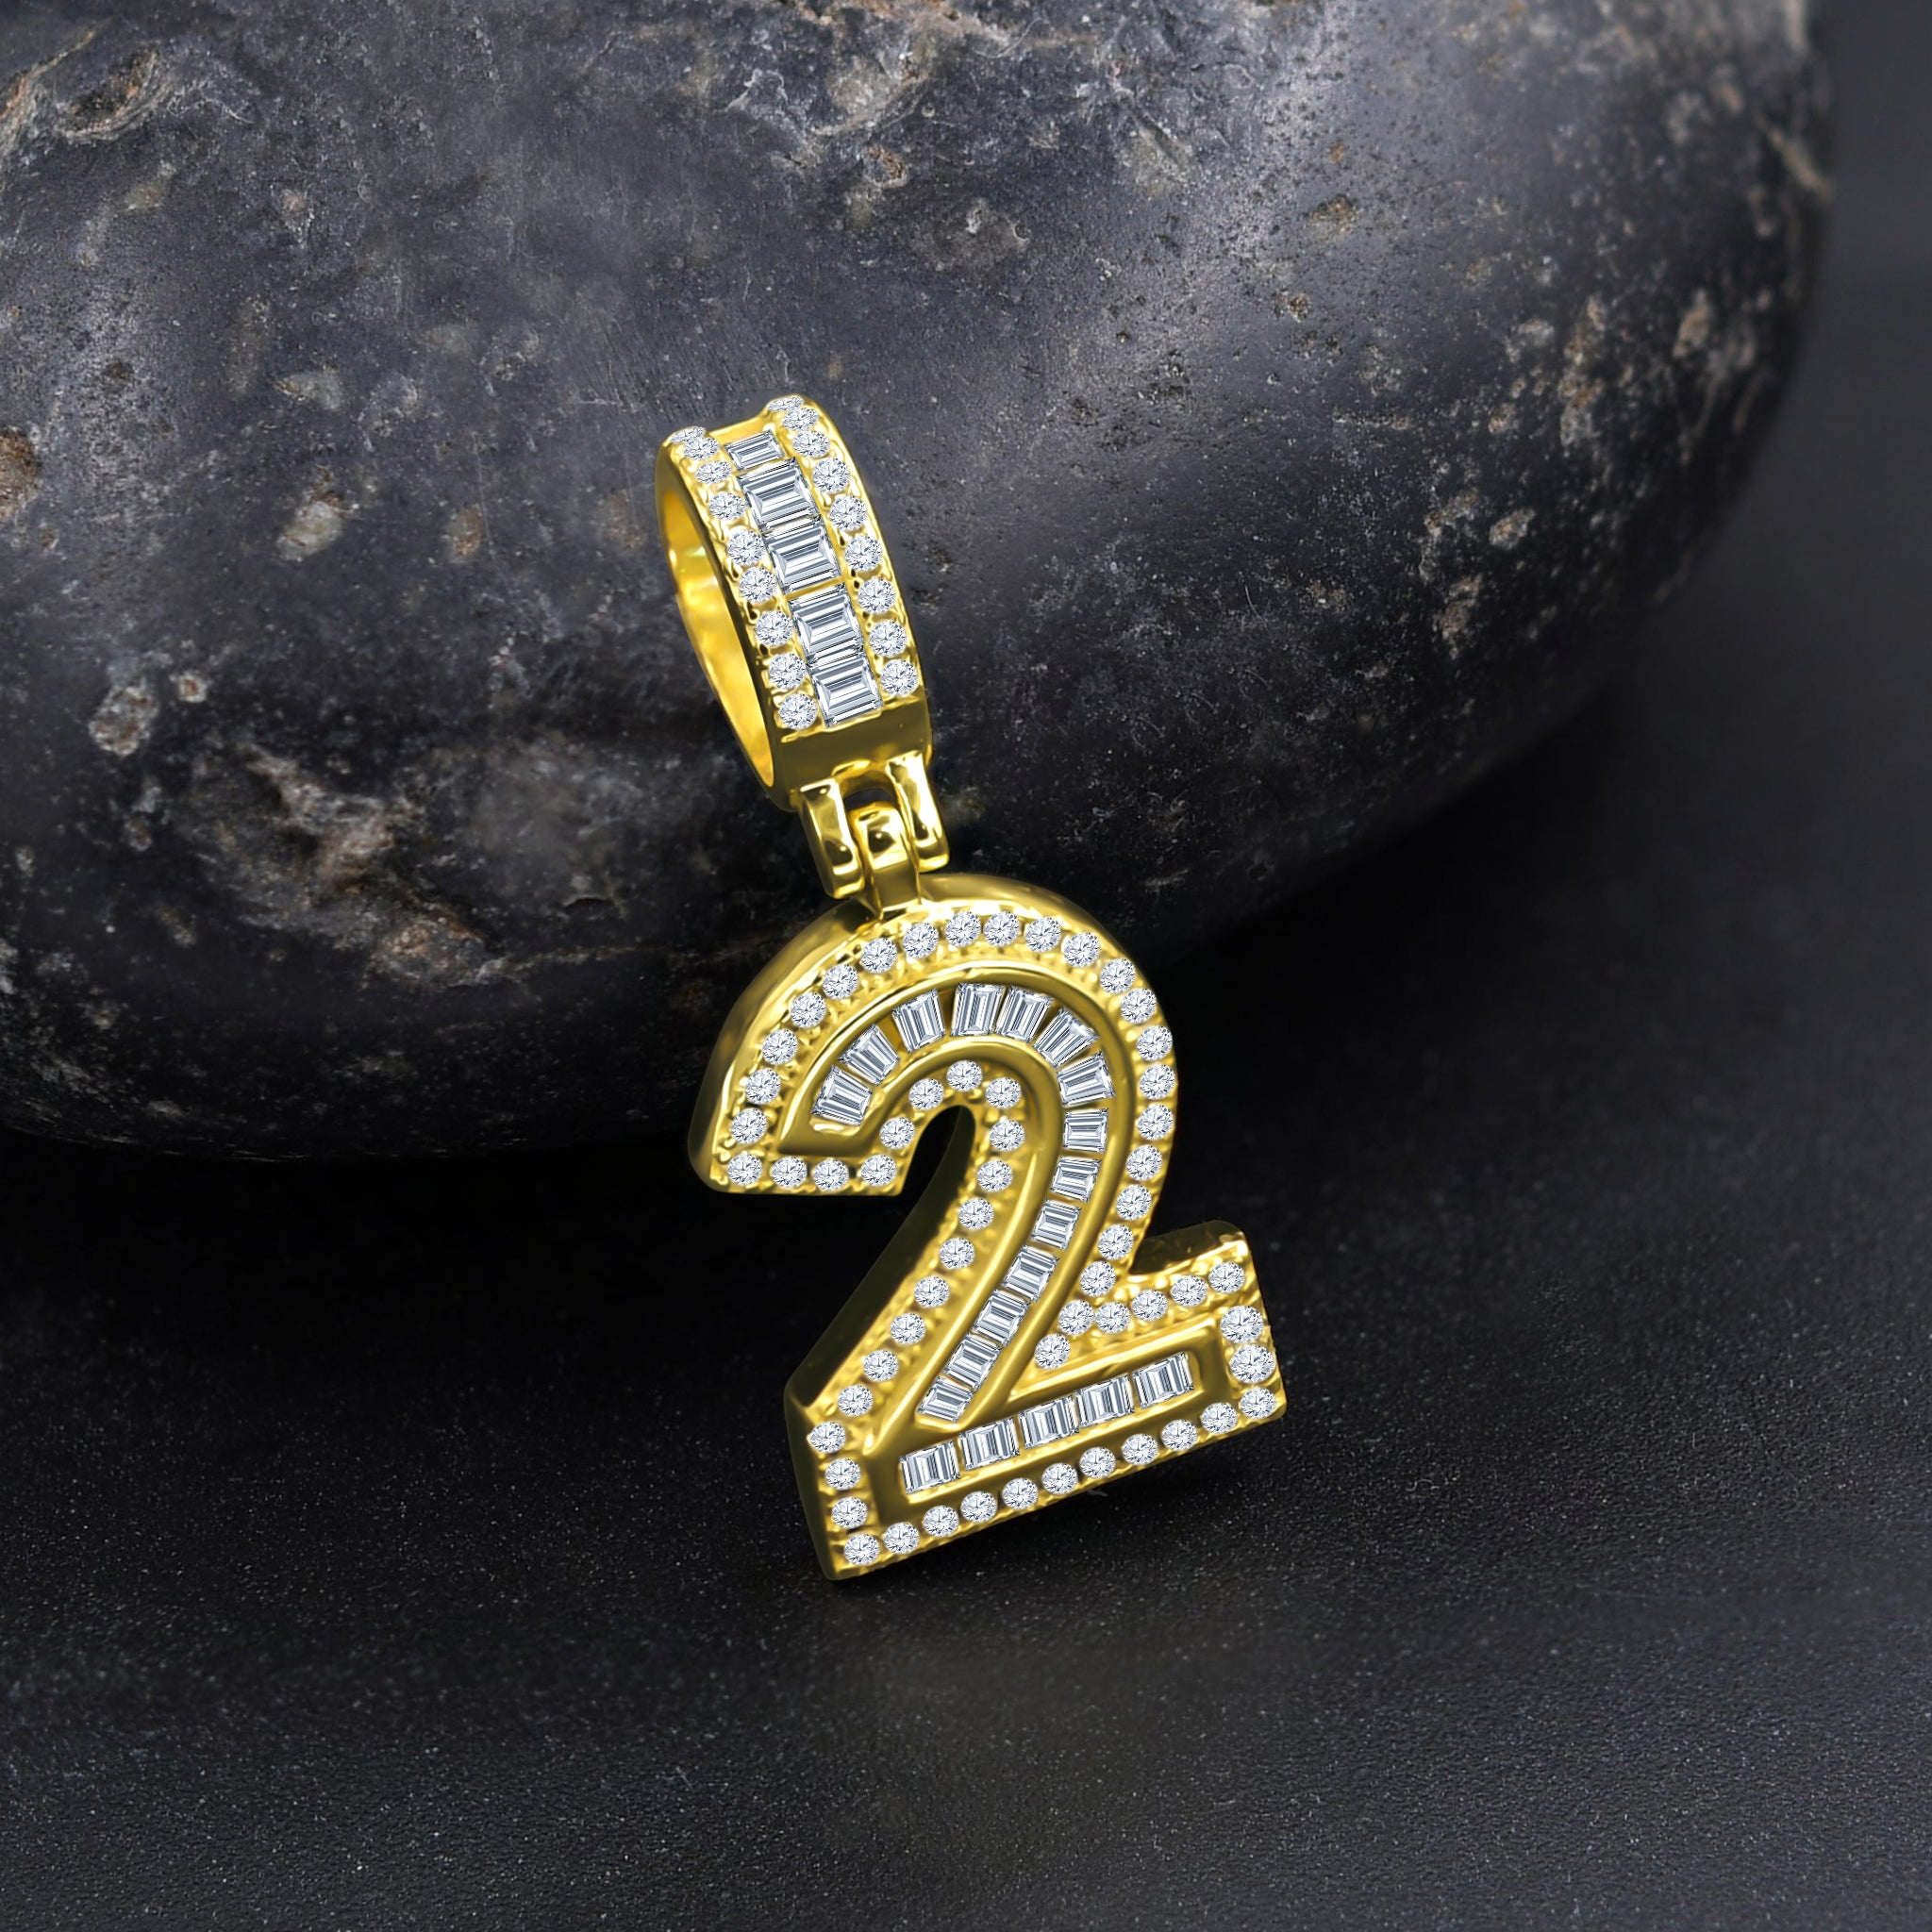 CIPHER STERLING SILVER (NUMERIC) PENDANT WITH CZ I 9218371